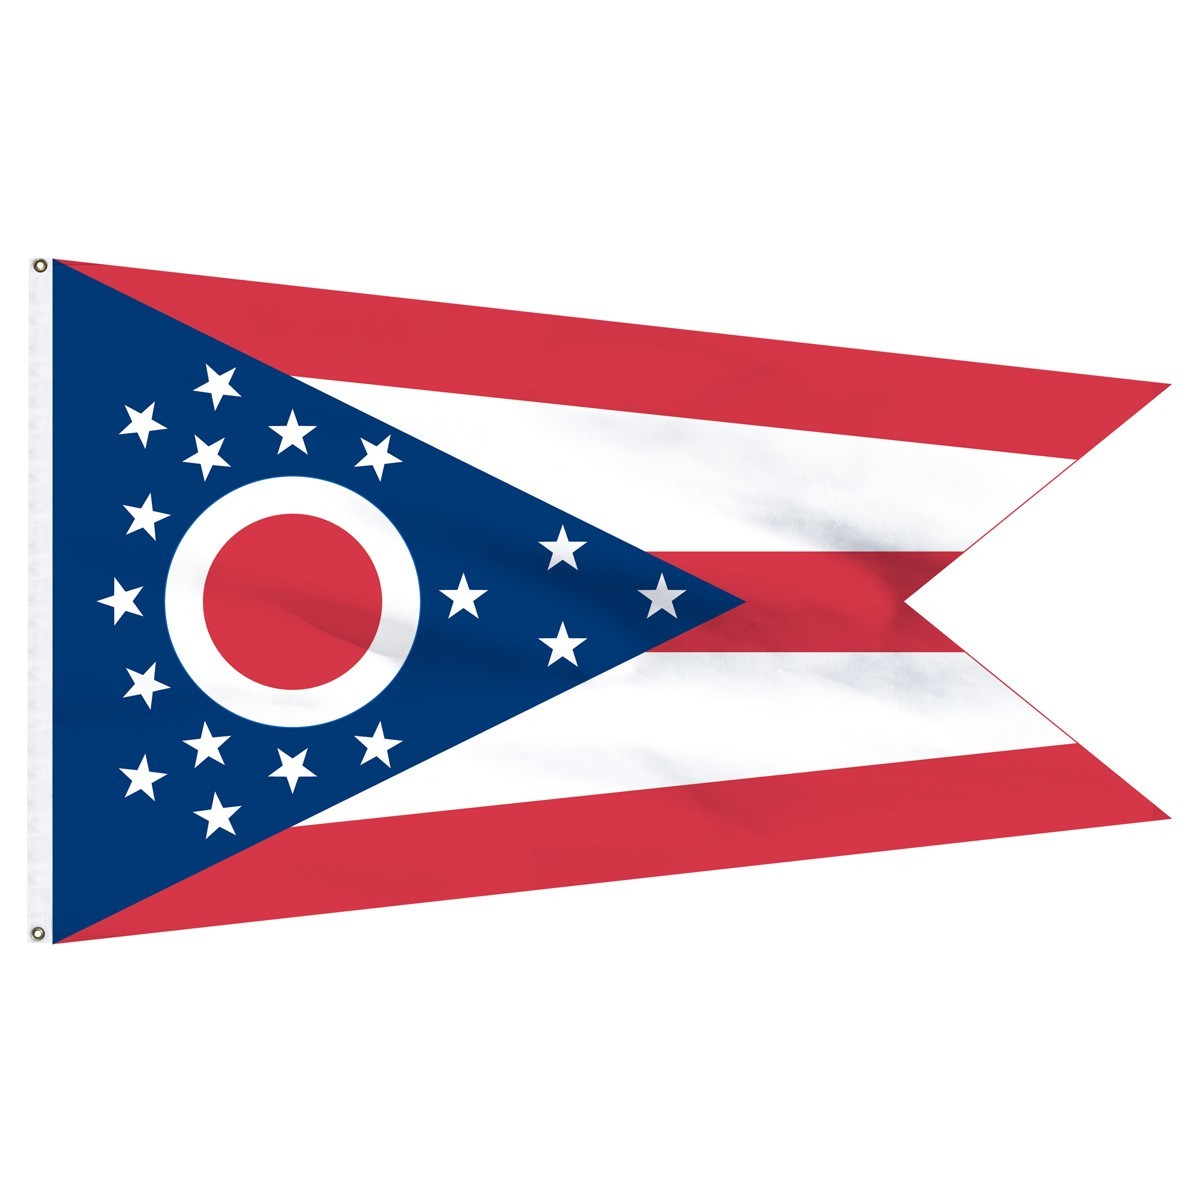 Ohio polyester nylon classroom flags for sale